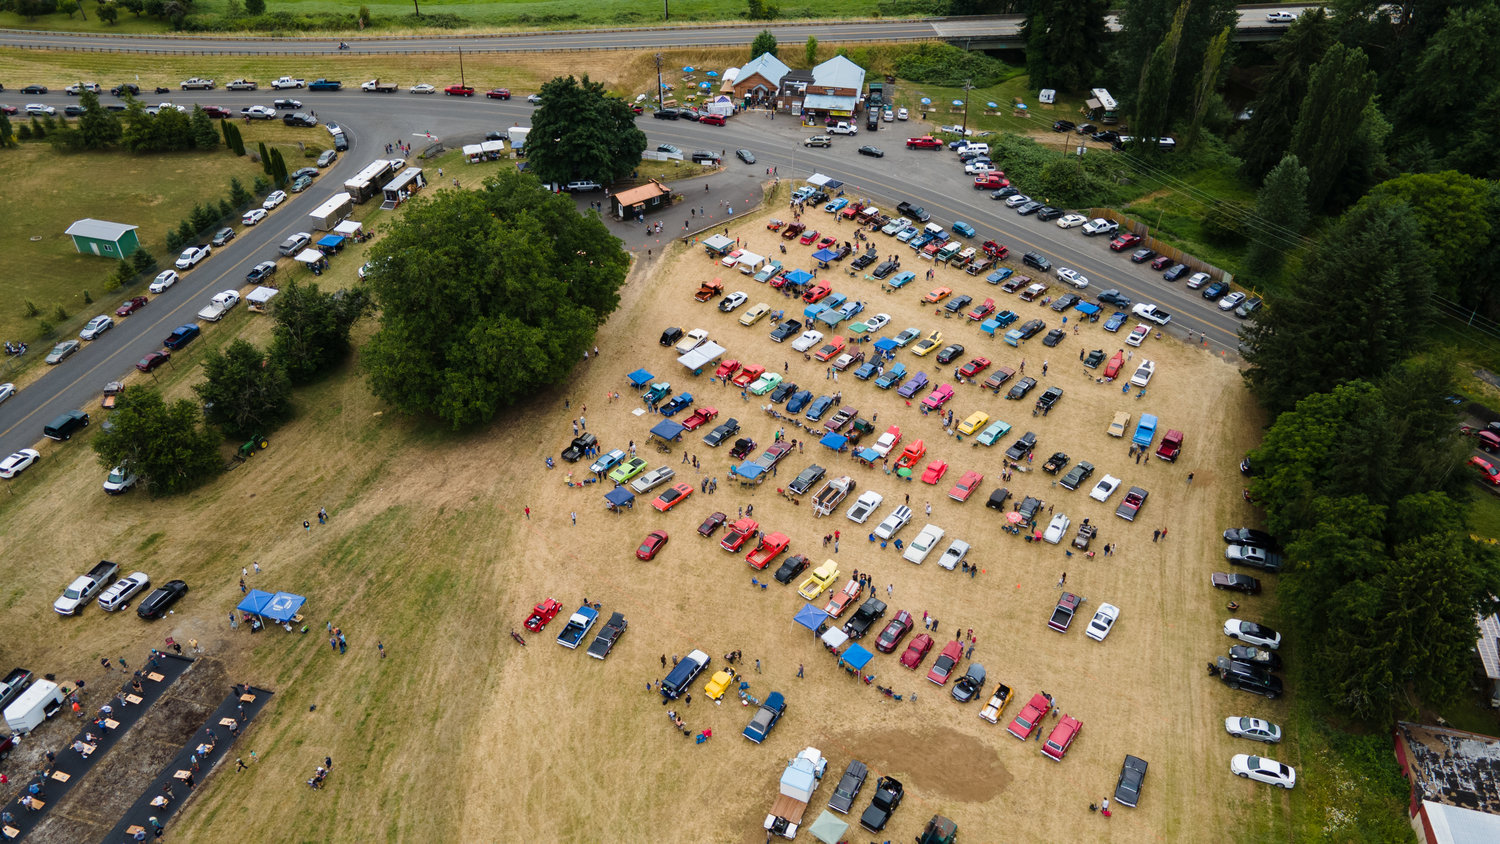 captured this photograph of the Adna Car Show from above over the weekend.